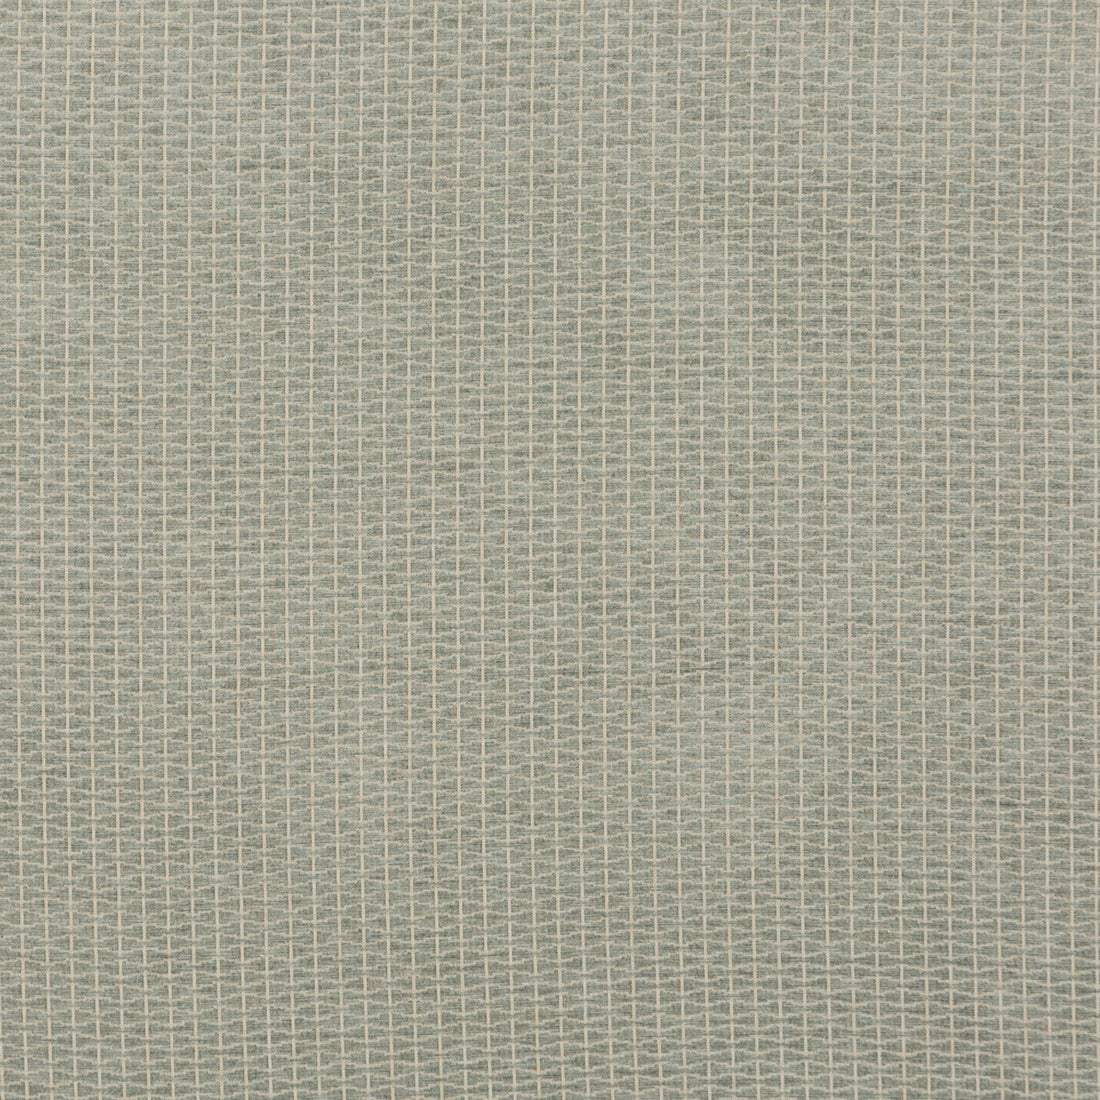 Vortex fabric in sea foam color - pattern BF10681.721.0 - by G P &amp; J Baker in the Essential Colours collection